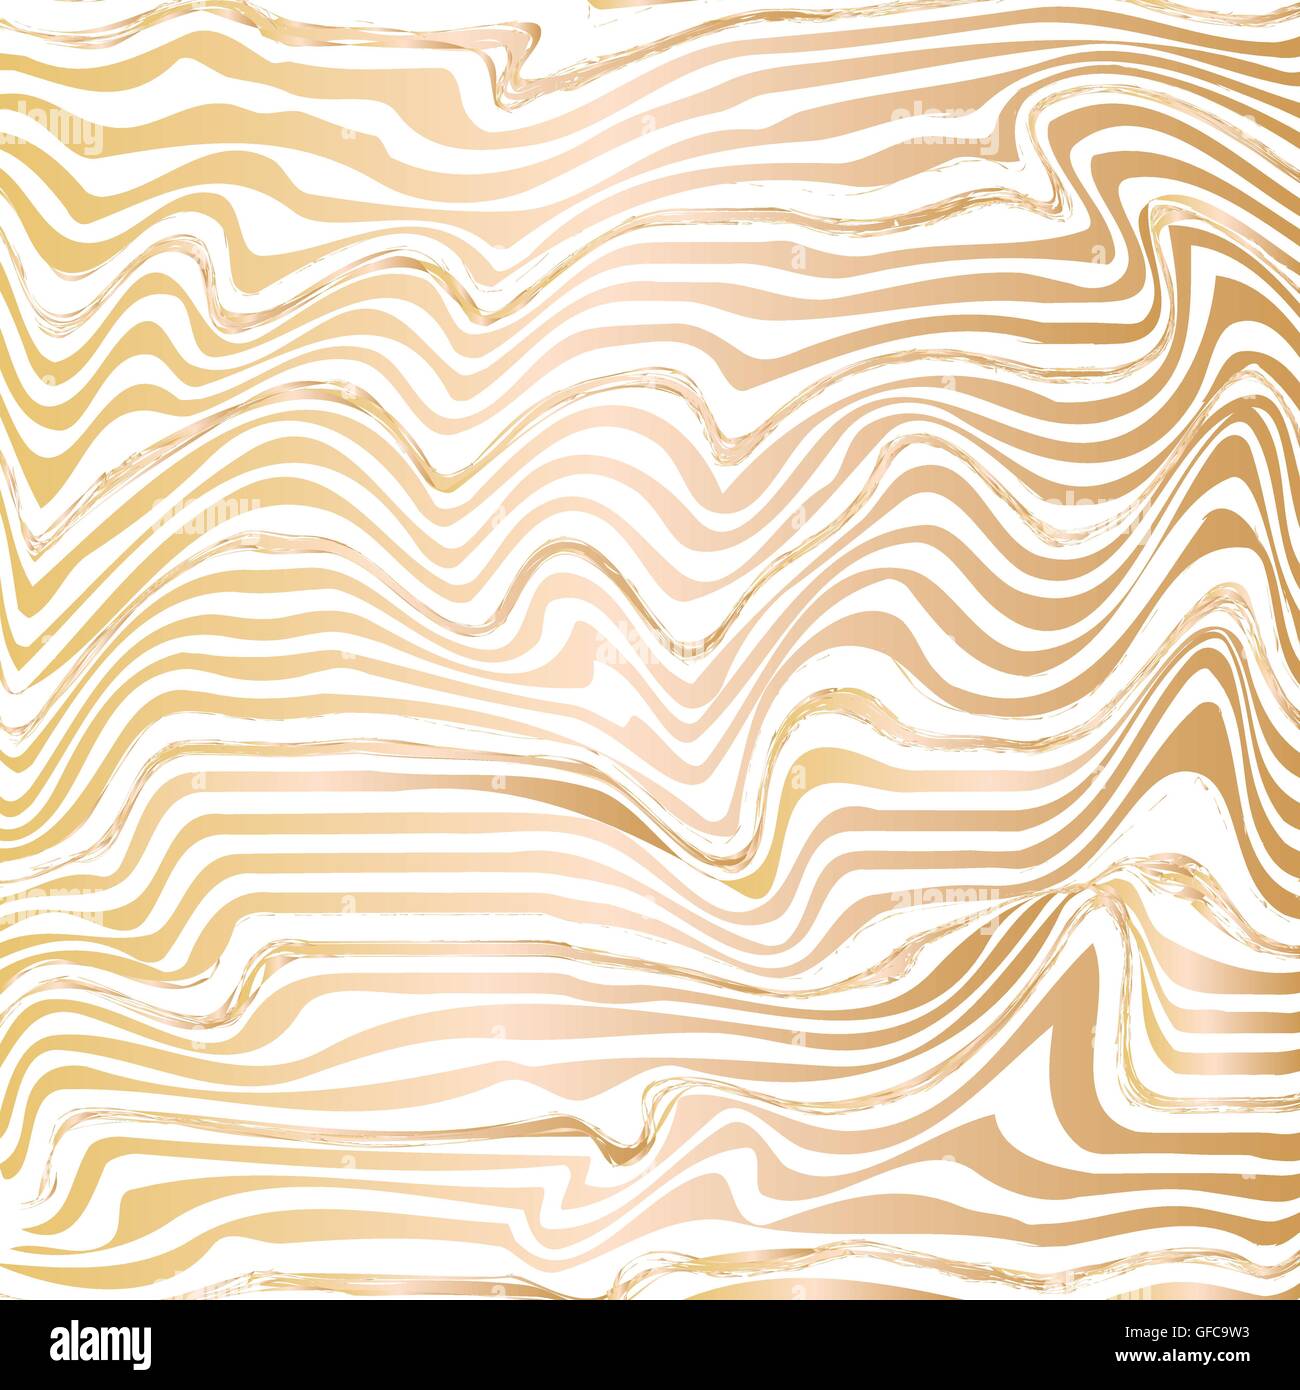 Golden abstract wave line ink texture. Hand drawn marbling illustration technique. Stock Vector